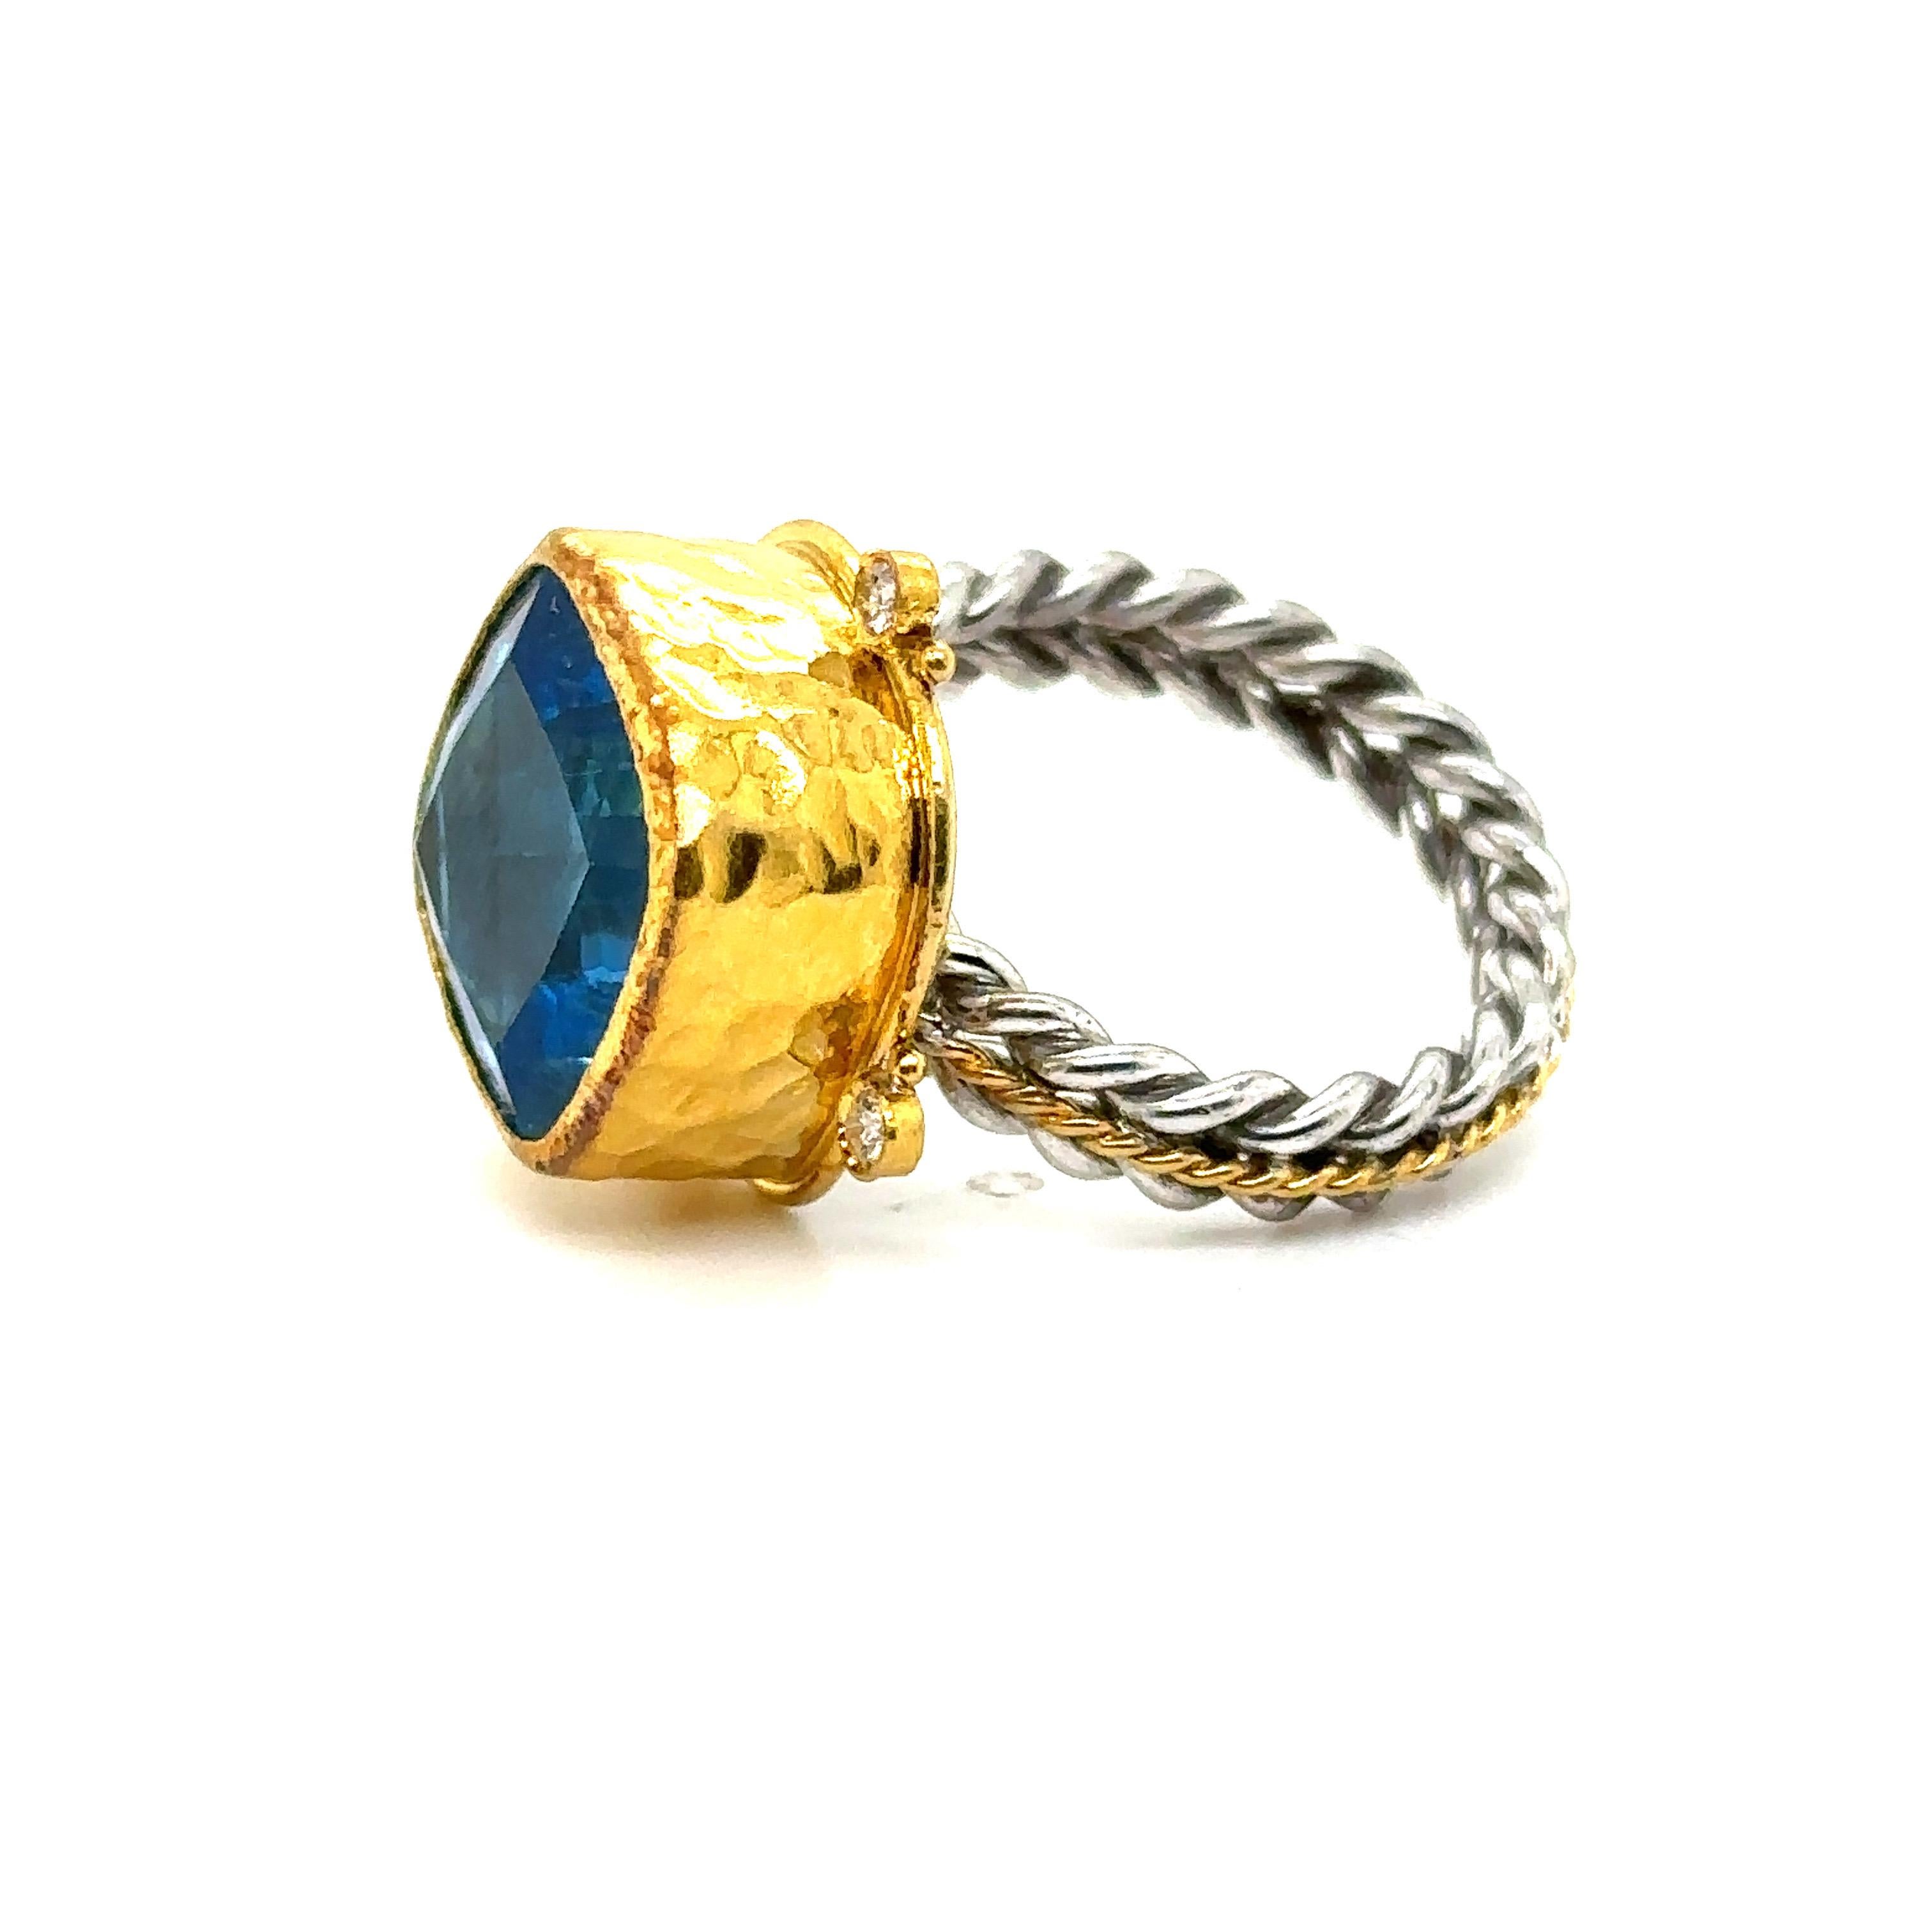 Modern JAS-19-1995 - 24K GOLD/STERLING SILVER RING 0.10Ct DIAS.  For Sale